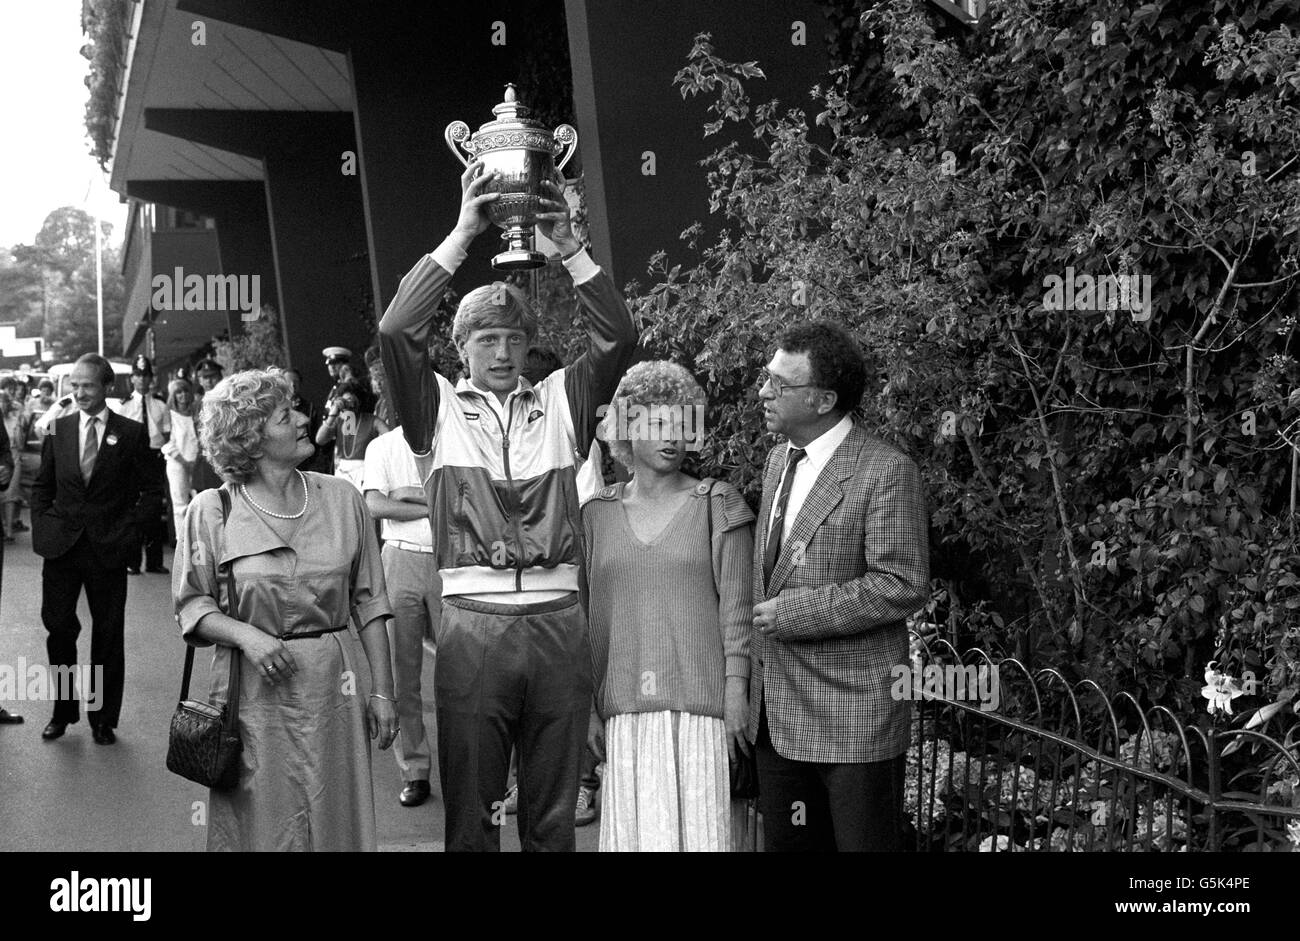 The Wimbledon men's singles champion, Boris Becker, with his family after winning the title by defeating Kevin Curren6-3 6-7 7-6 6-4 in three hours 19 minutes. His center court victory put him in the record books for being the first unseeded player, and, at 17, the youngest to win the title. Stock Photo